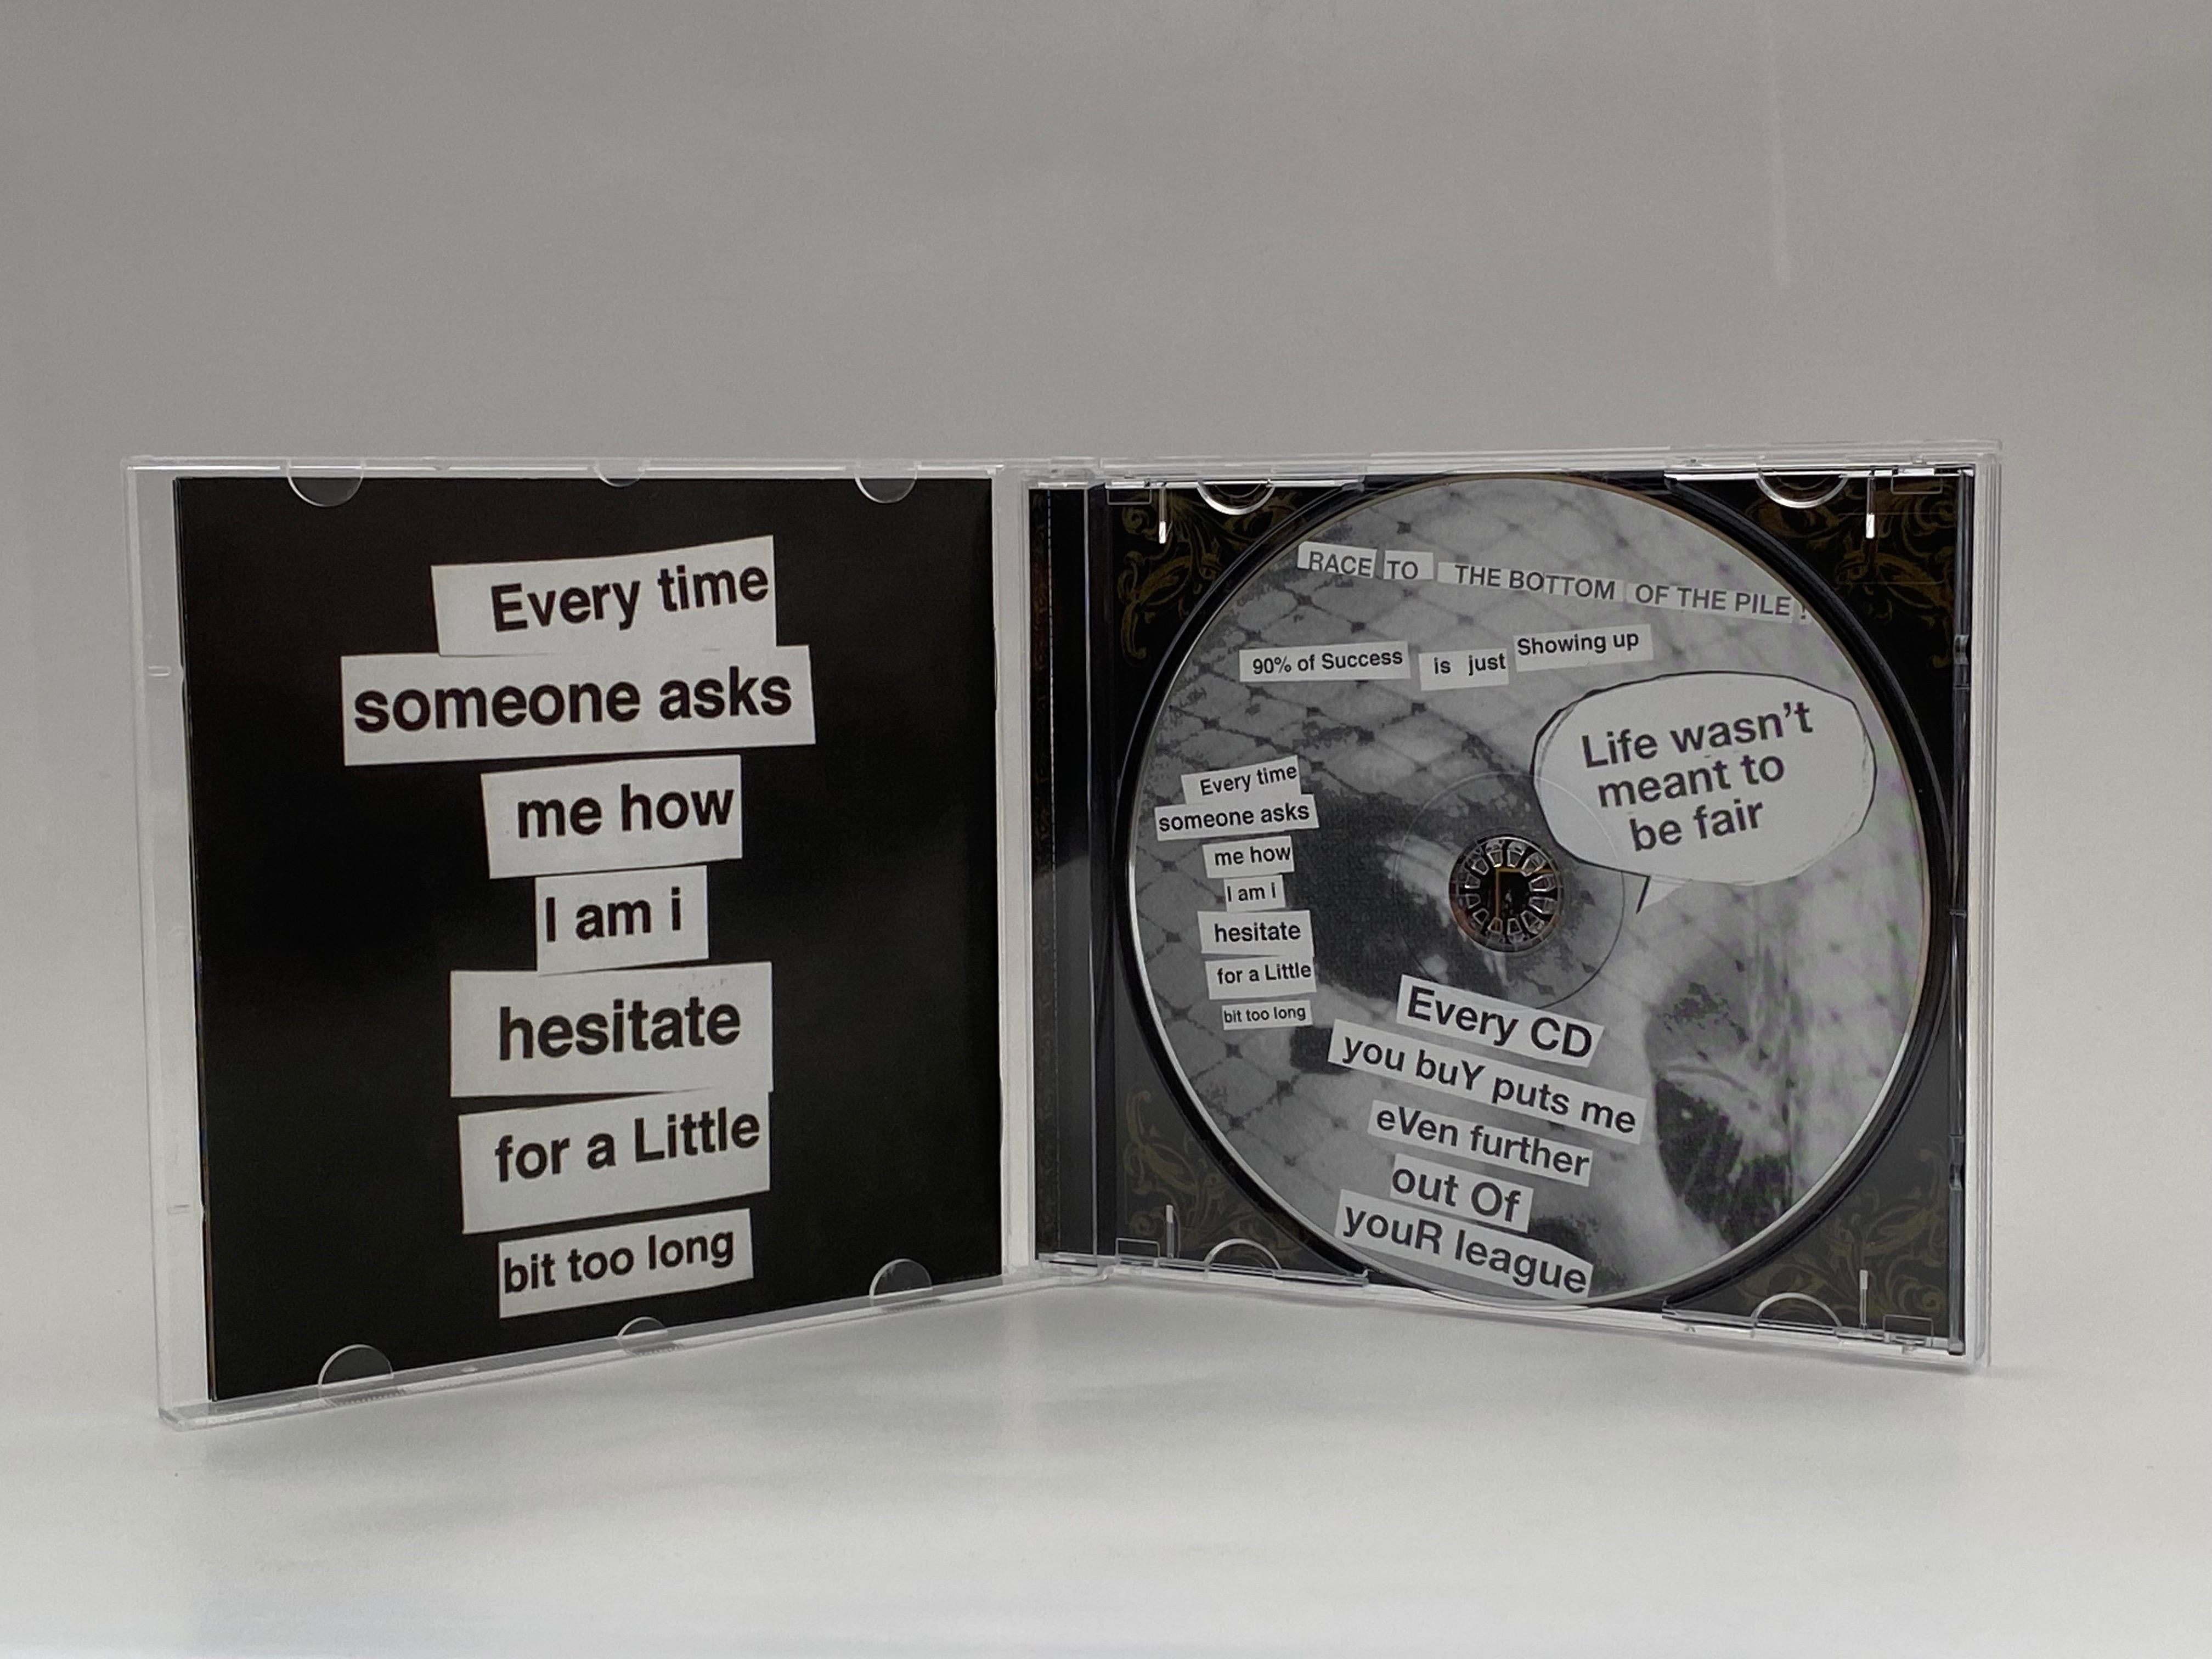 Year: 2006
Edition: 1000
Medium: Compact Disc
Size: 12.0 cm x 14.0 cm x 1.0 cm
Materials: Acrylic and Printed Paper

 
Banksy vs Paris Hilton (Second Pressing), 2006
Authenticity marked with ‘BANKSY001’ on the central section of the CD.

Banksy and